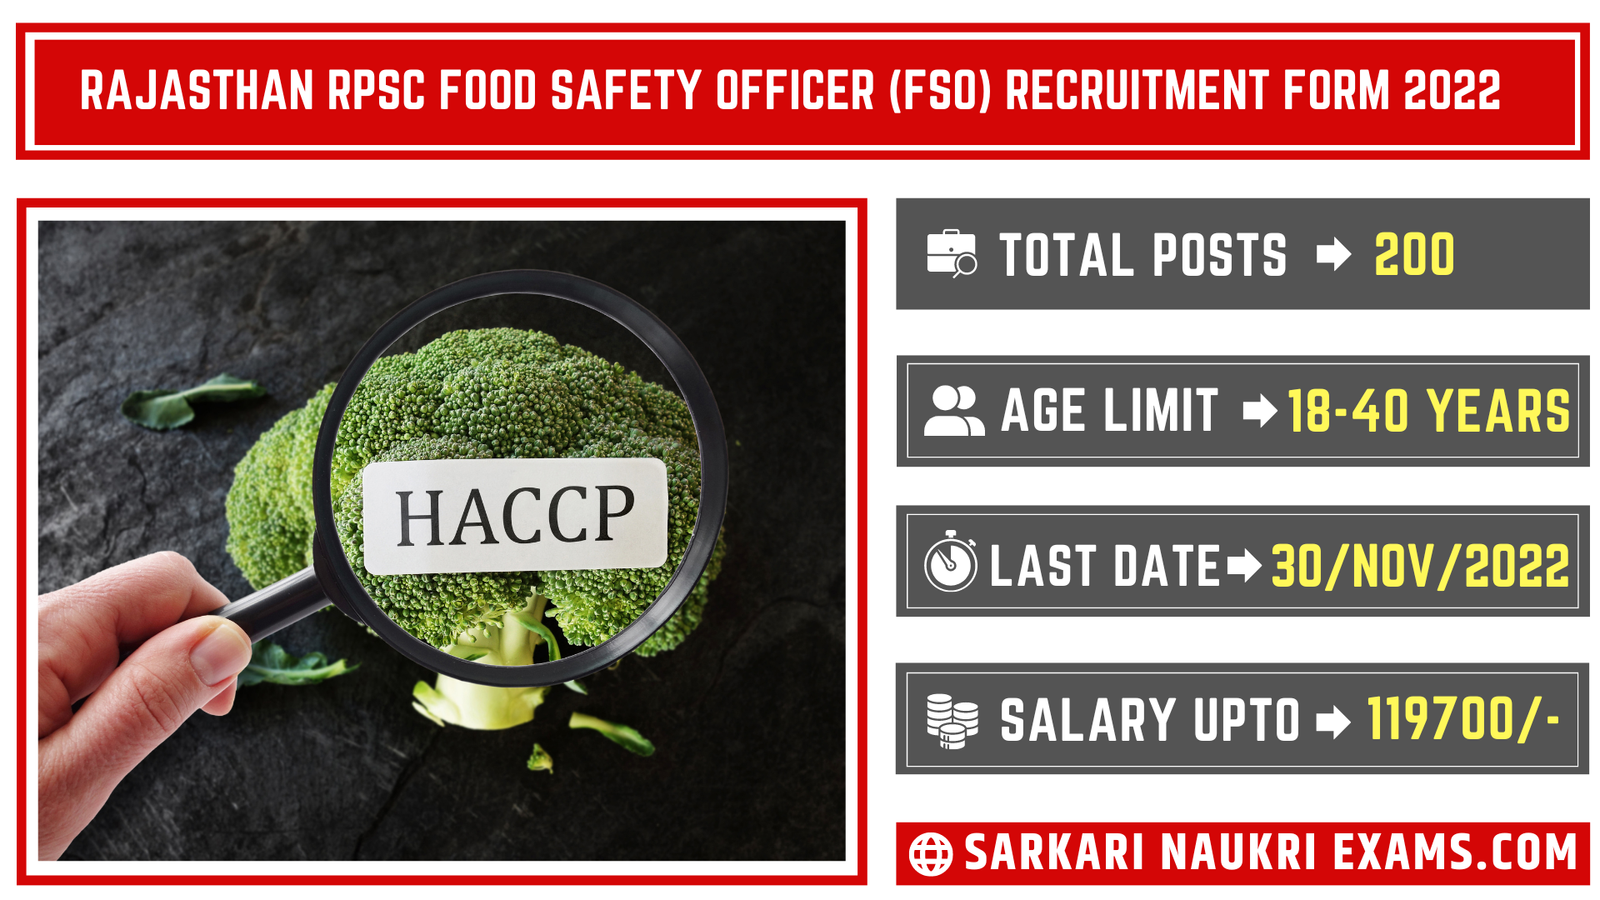 Rajasthan RPSC Food Safety Officer (FSO) Recruitment Form 2022